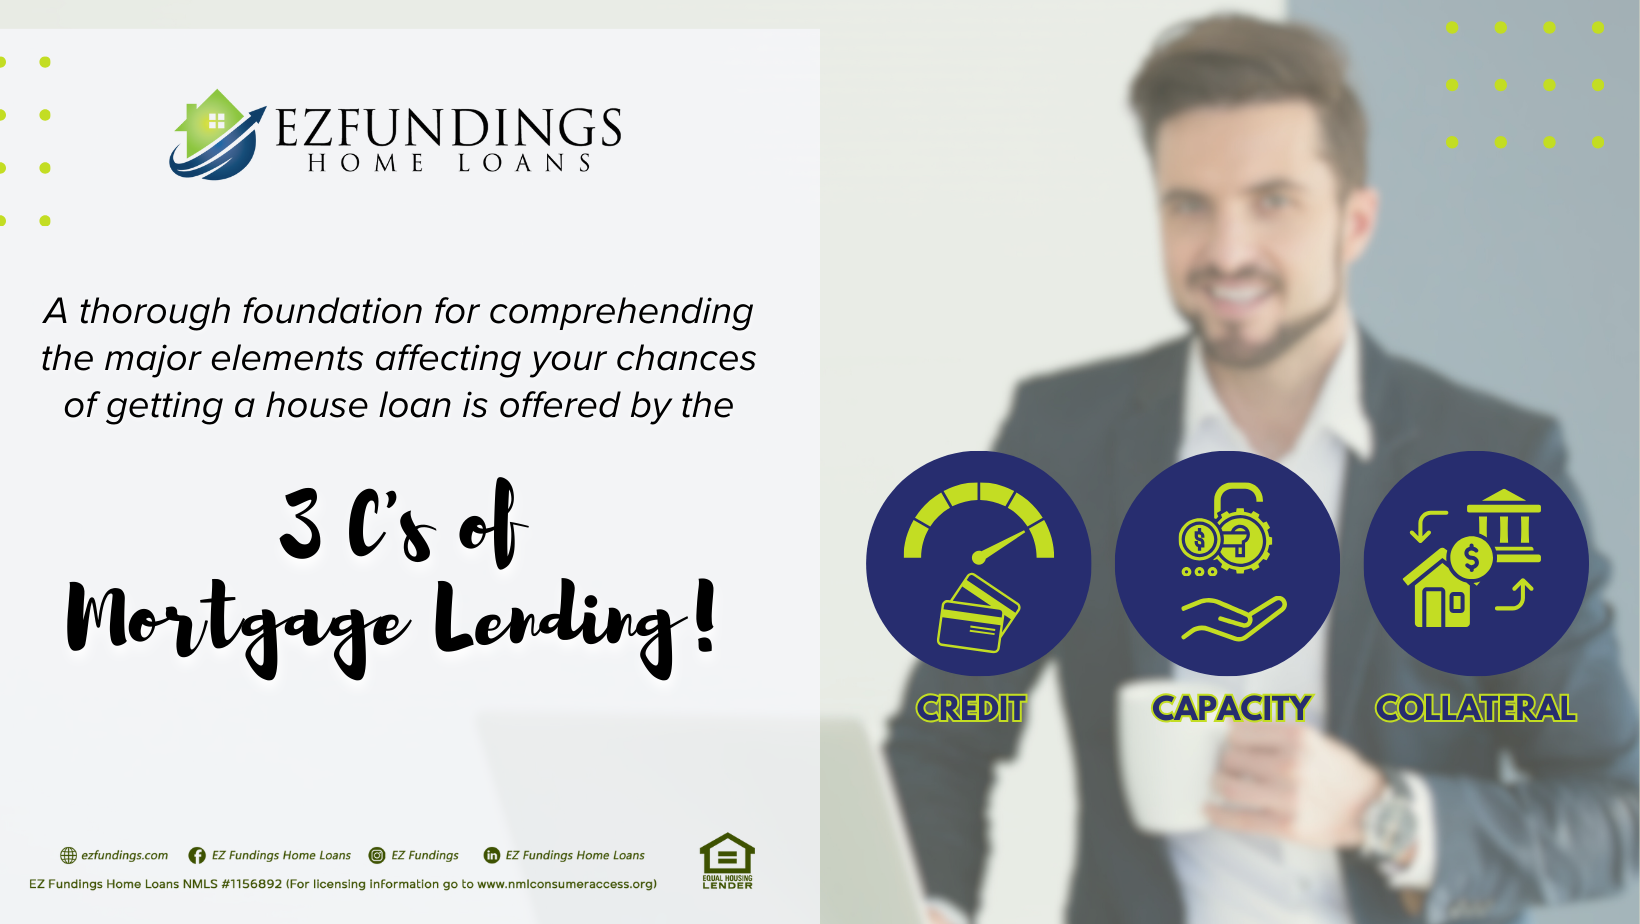 The 3 C's of Mortgage Lending: Credit, Capacity, Collateral - Your keys to securing the home of your dreams!